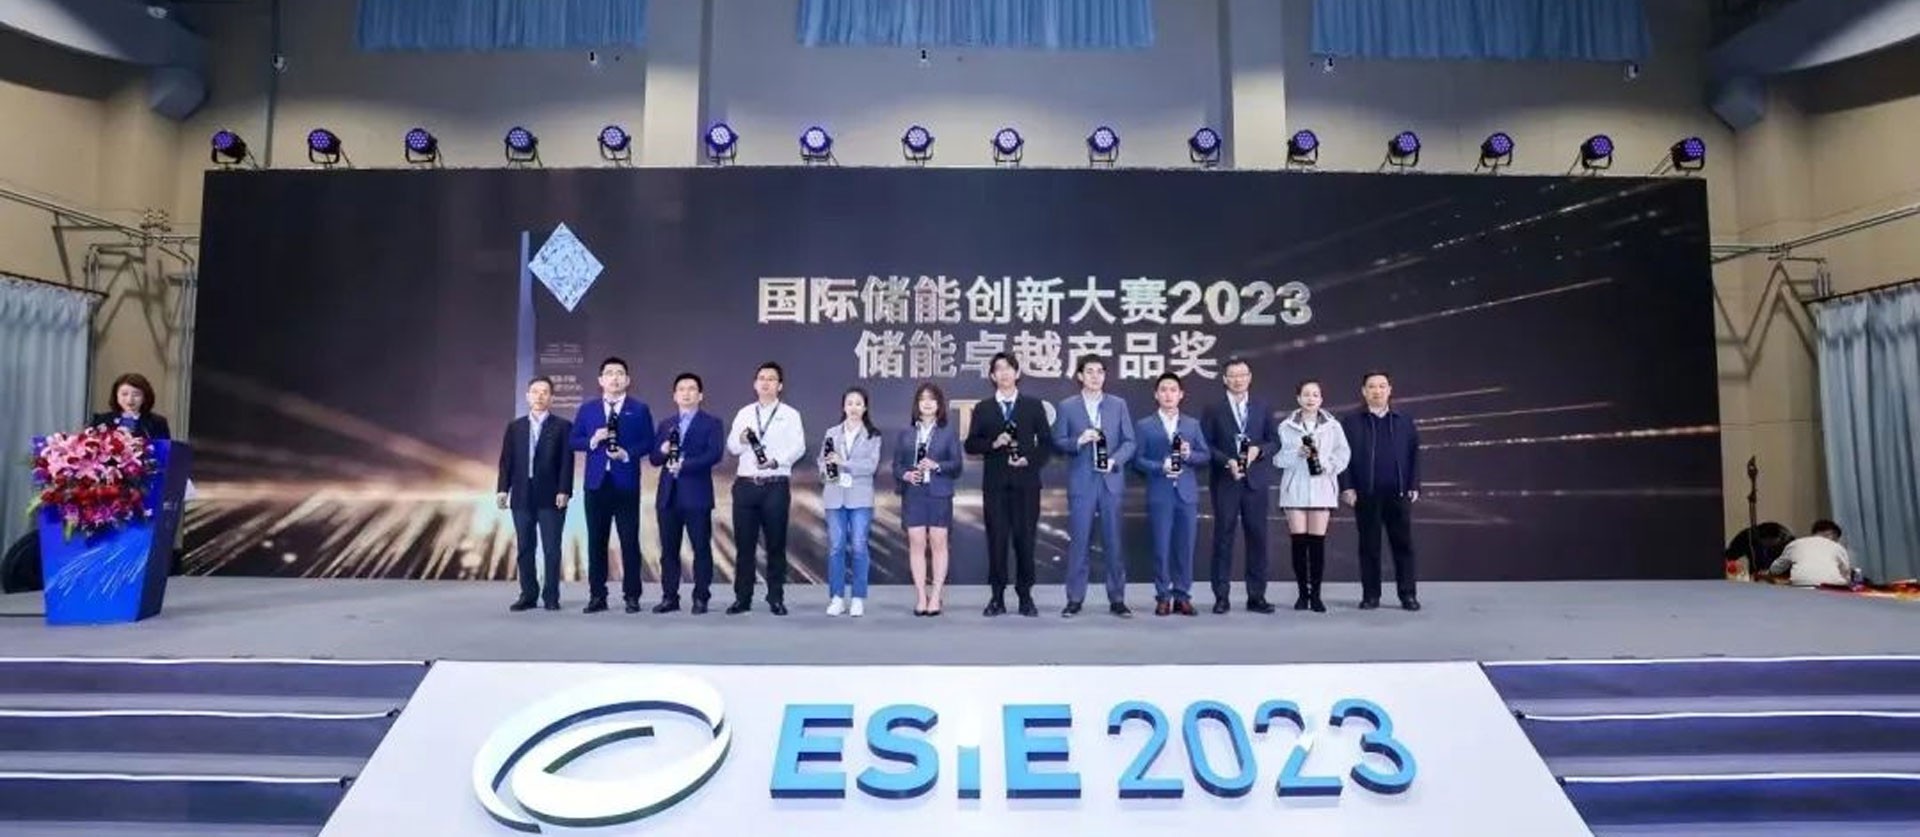 2023 energy storage international summit | occupying the highest ground in energy storage, rept battero will release an upgraded 320ah battery cell soon